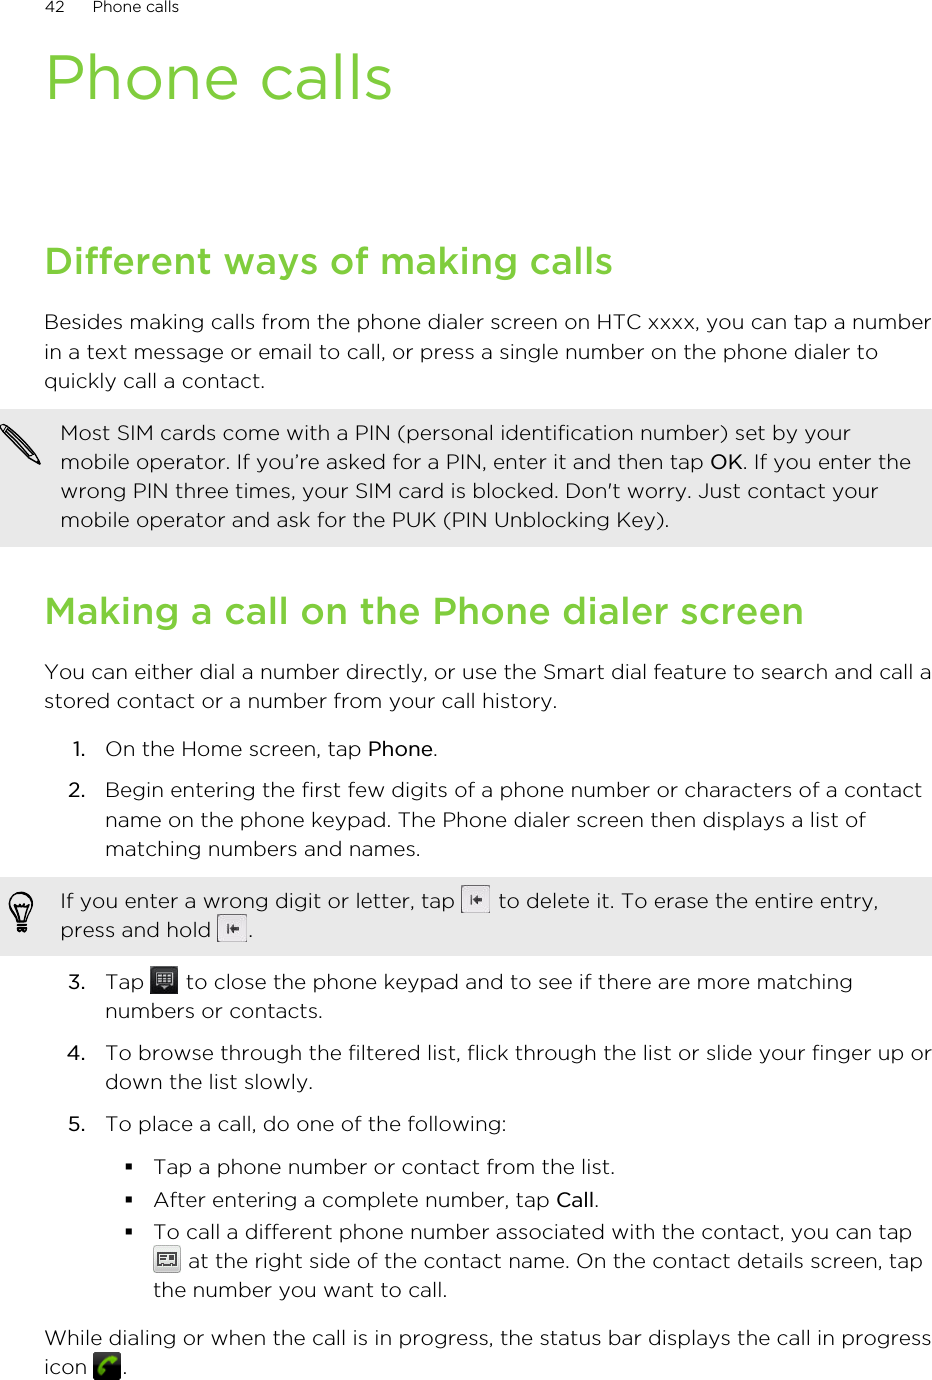 Phone callsDifferent ways of making callsBesides making calls from the phone dialer screen on HTC xxxx, you can tap a numberin a text message or email to call, or press a single number on the phone dialer toquickly call a contact.Most SIM cards come with a PIN (personal identification number) set by yourmobile operator. If you’re asked for a PIN, enter it and then tap OK. If you enter thewrong PIN three times, your SIM card is blocked. Don&apos;t worry. Just contact yourmobile operator and ask for the PUK (PIN Unblocking Key).Making a call on the Phone dialer screenYou can either dial a number directly, or use the Smart dial feature to search and call astored contact or a number from your call history.1. On the Home screen, tap Phone.2. Begin entering the first few digits of a phone number or characters of a contactname on the phone keypad. The Phone dialer screen then displays a list ofmatching numbers and names.If you enter a wrong digit or letter, tap   to delete it. To erase the entire entry,press and hold  .3. Tap   to close the phone keypad and to see if there are more matchingnumbers or contacts.4. To browse through the filtered list, flick through the list or slide your finger up ordown the list slowly.5. To place a call, do one of the following:§Tap a phone number or contact from the list.§After entering a complete number, tap Call.§To call a different phone number associated with the contact, you can tap at the right side of the contact name. On the contact details screen, tapthe number you want to call.While dialing or when the call is in progress, the status bar displays the call in progressicon  .42 Phone calls